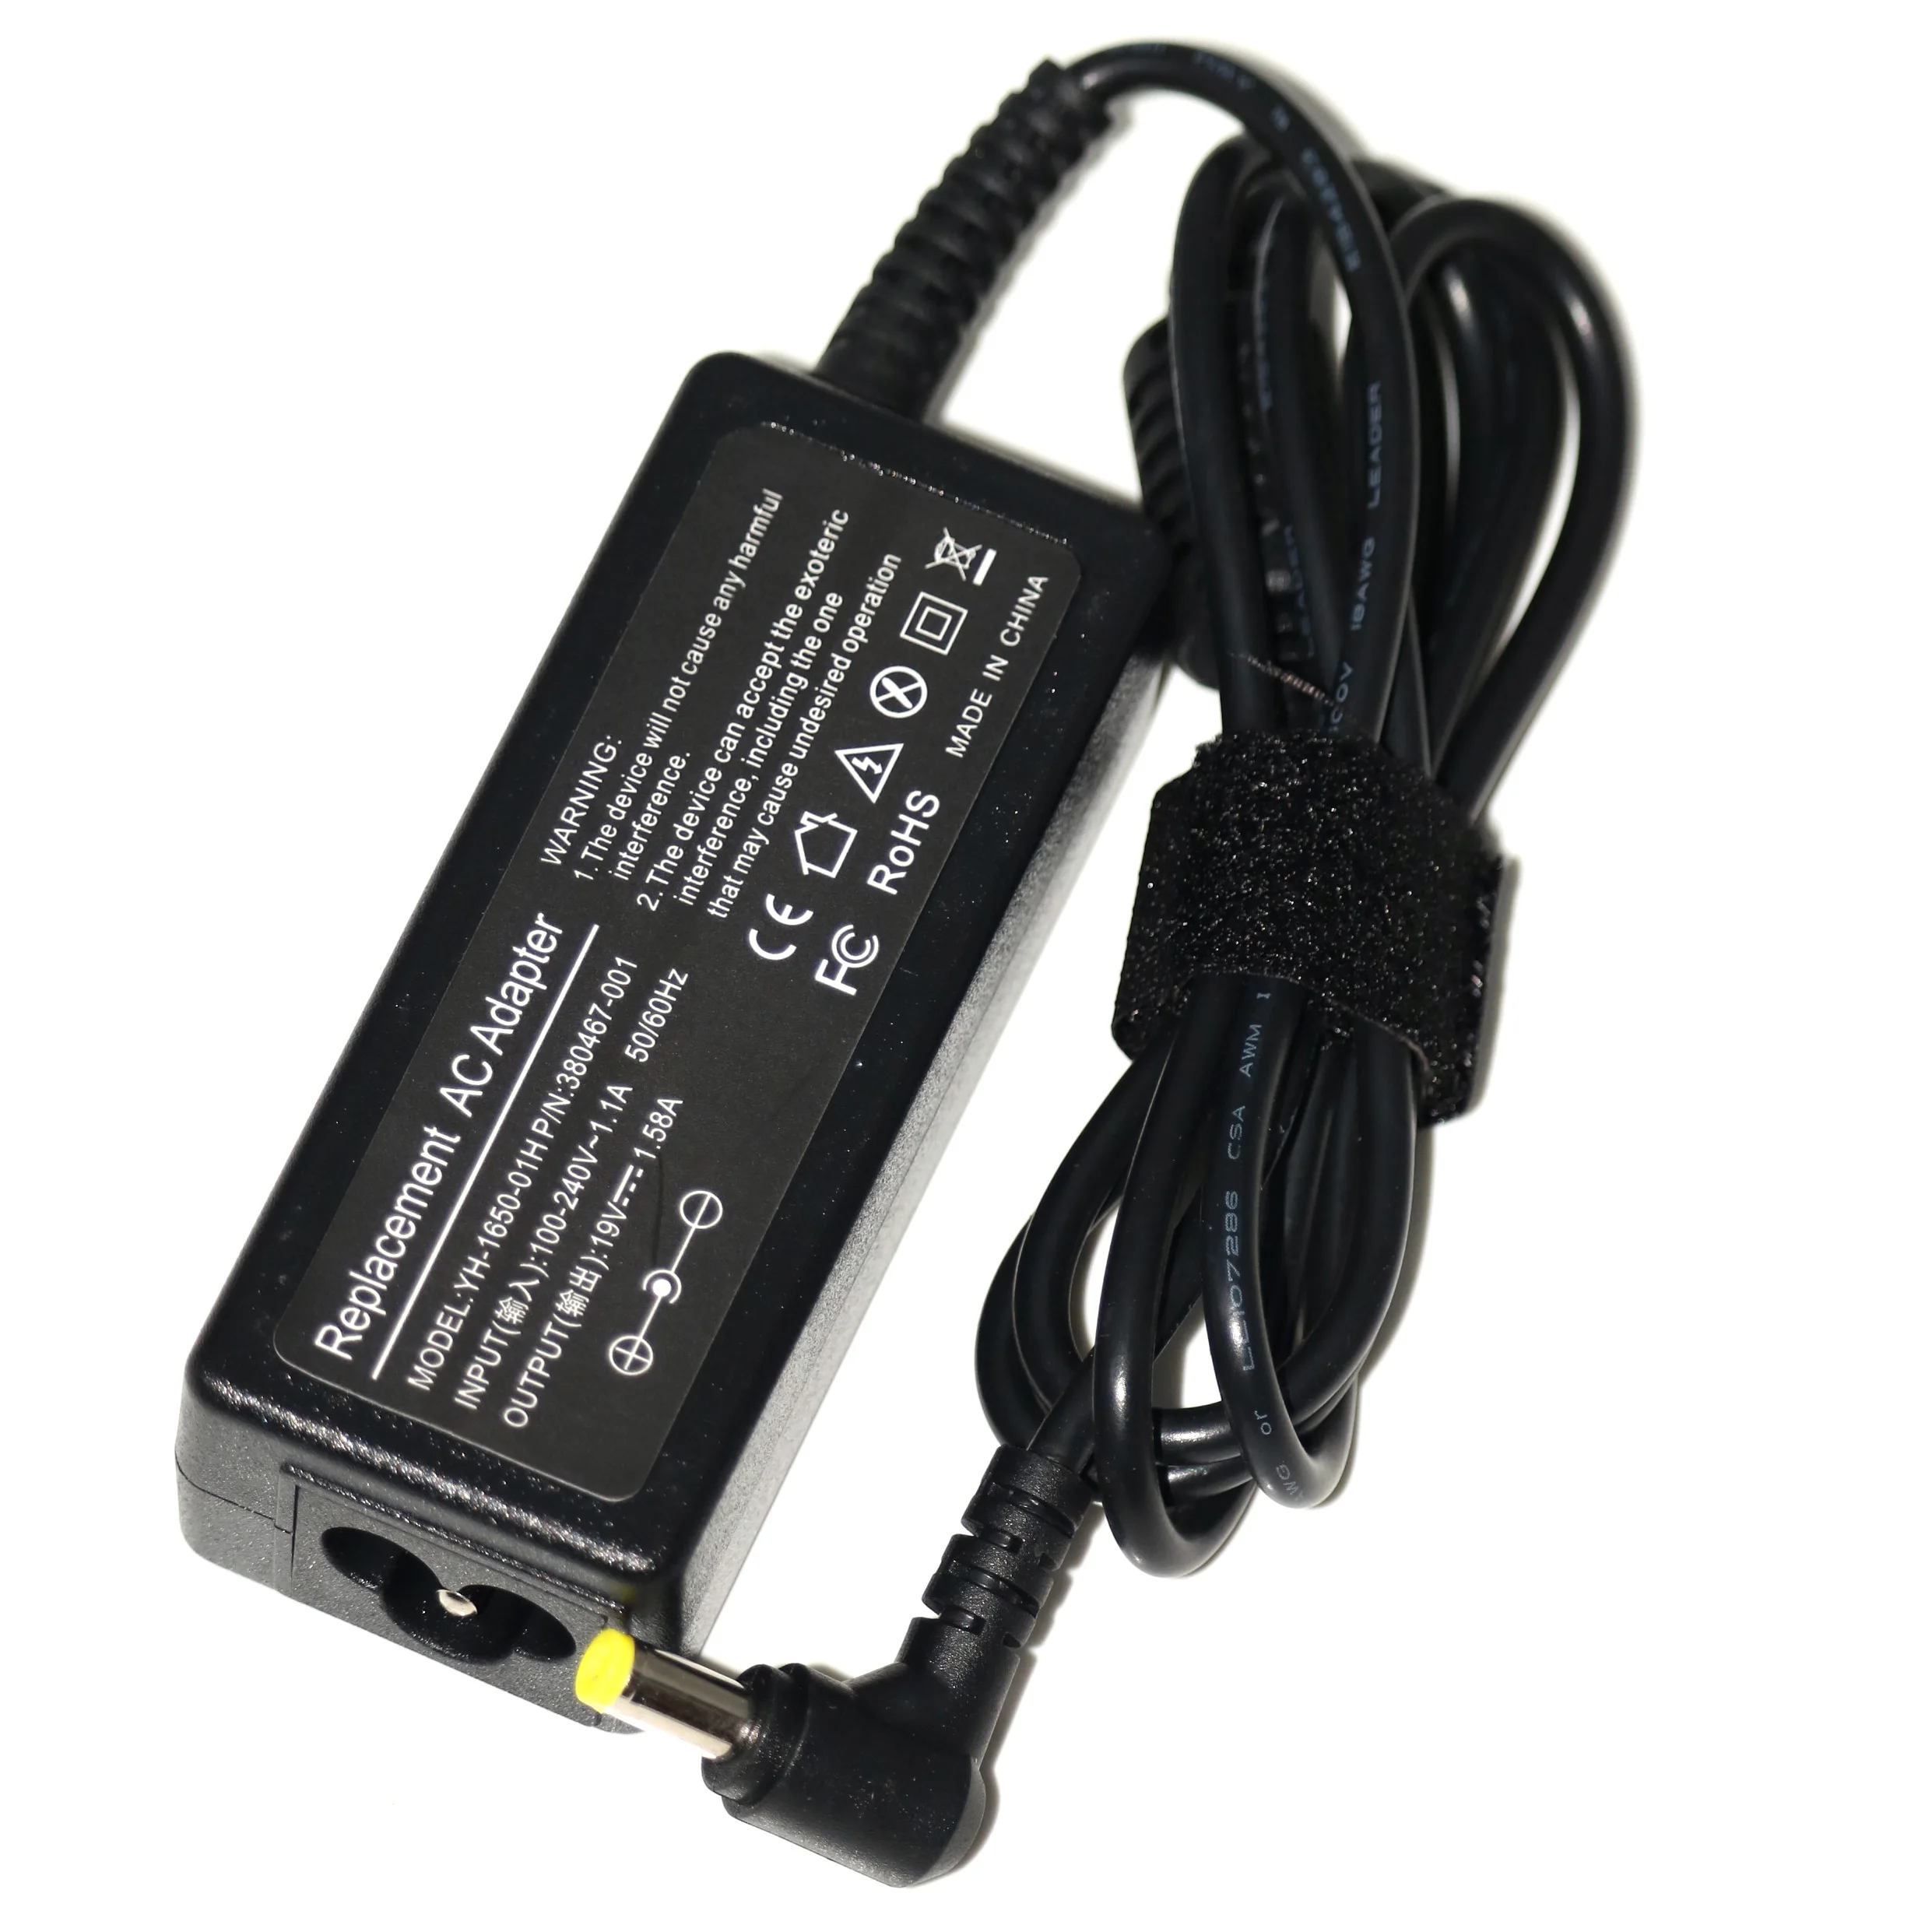 

19V 1.58A 30W AC Laptop Adapter Charger For Acer Aspire One AOA110 AOA150 ZG5 ZA3 NU ZH6 D255E D257 D260 A110 Power Supply